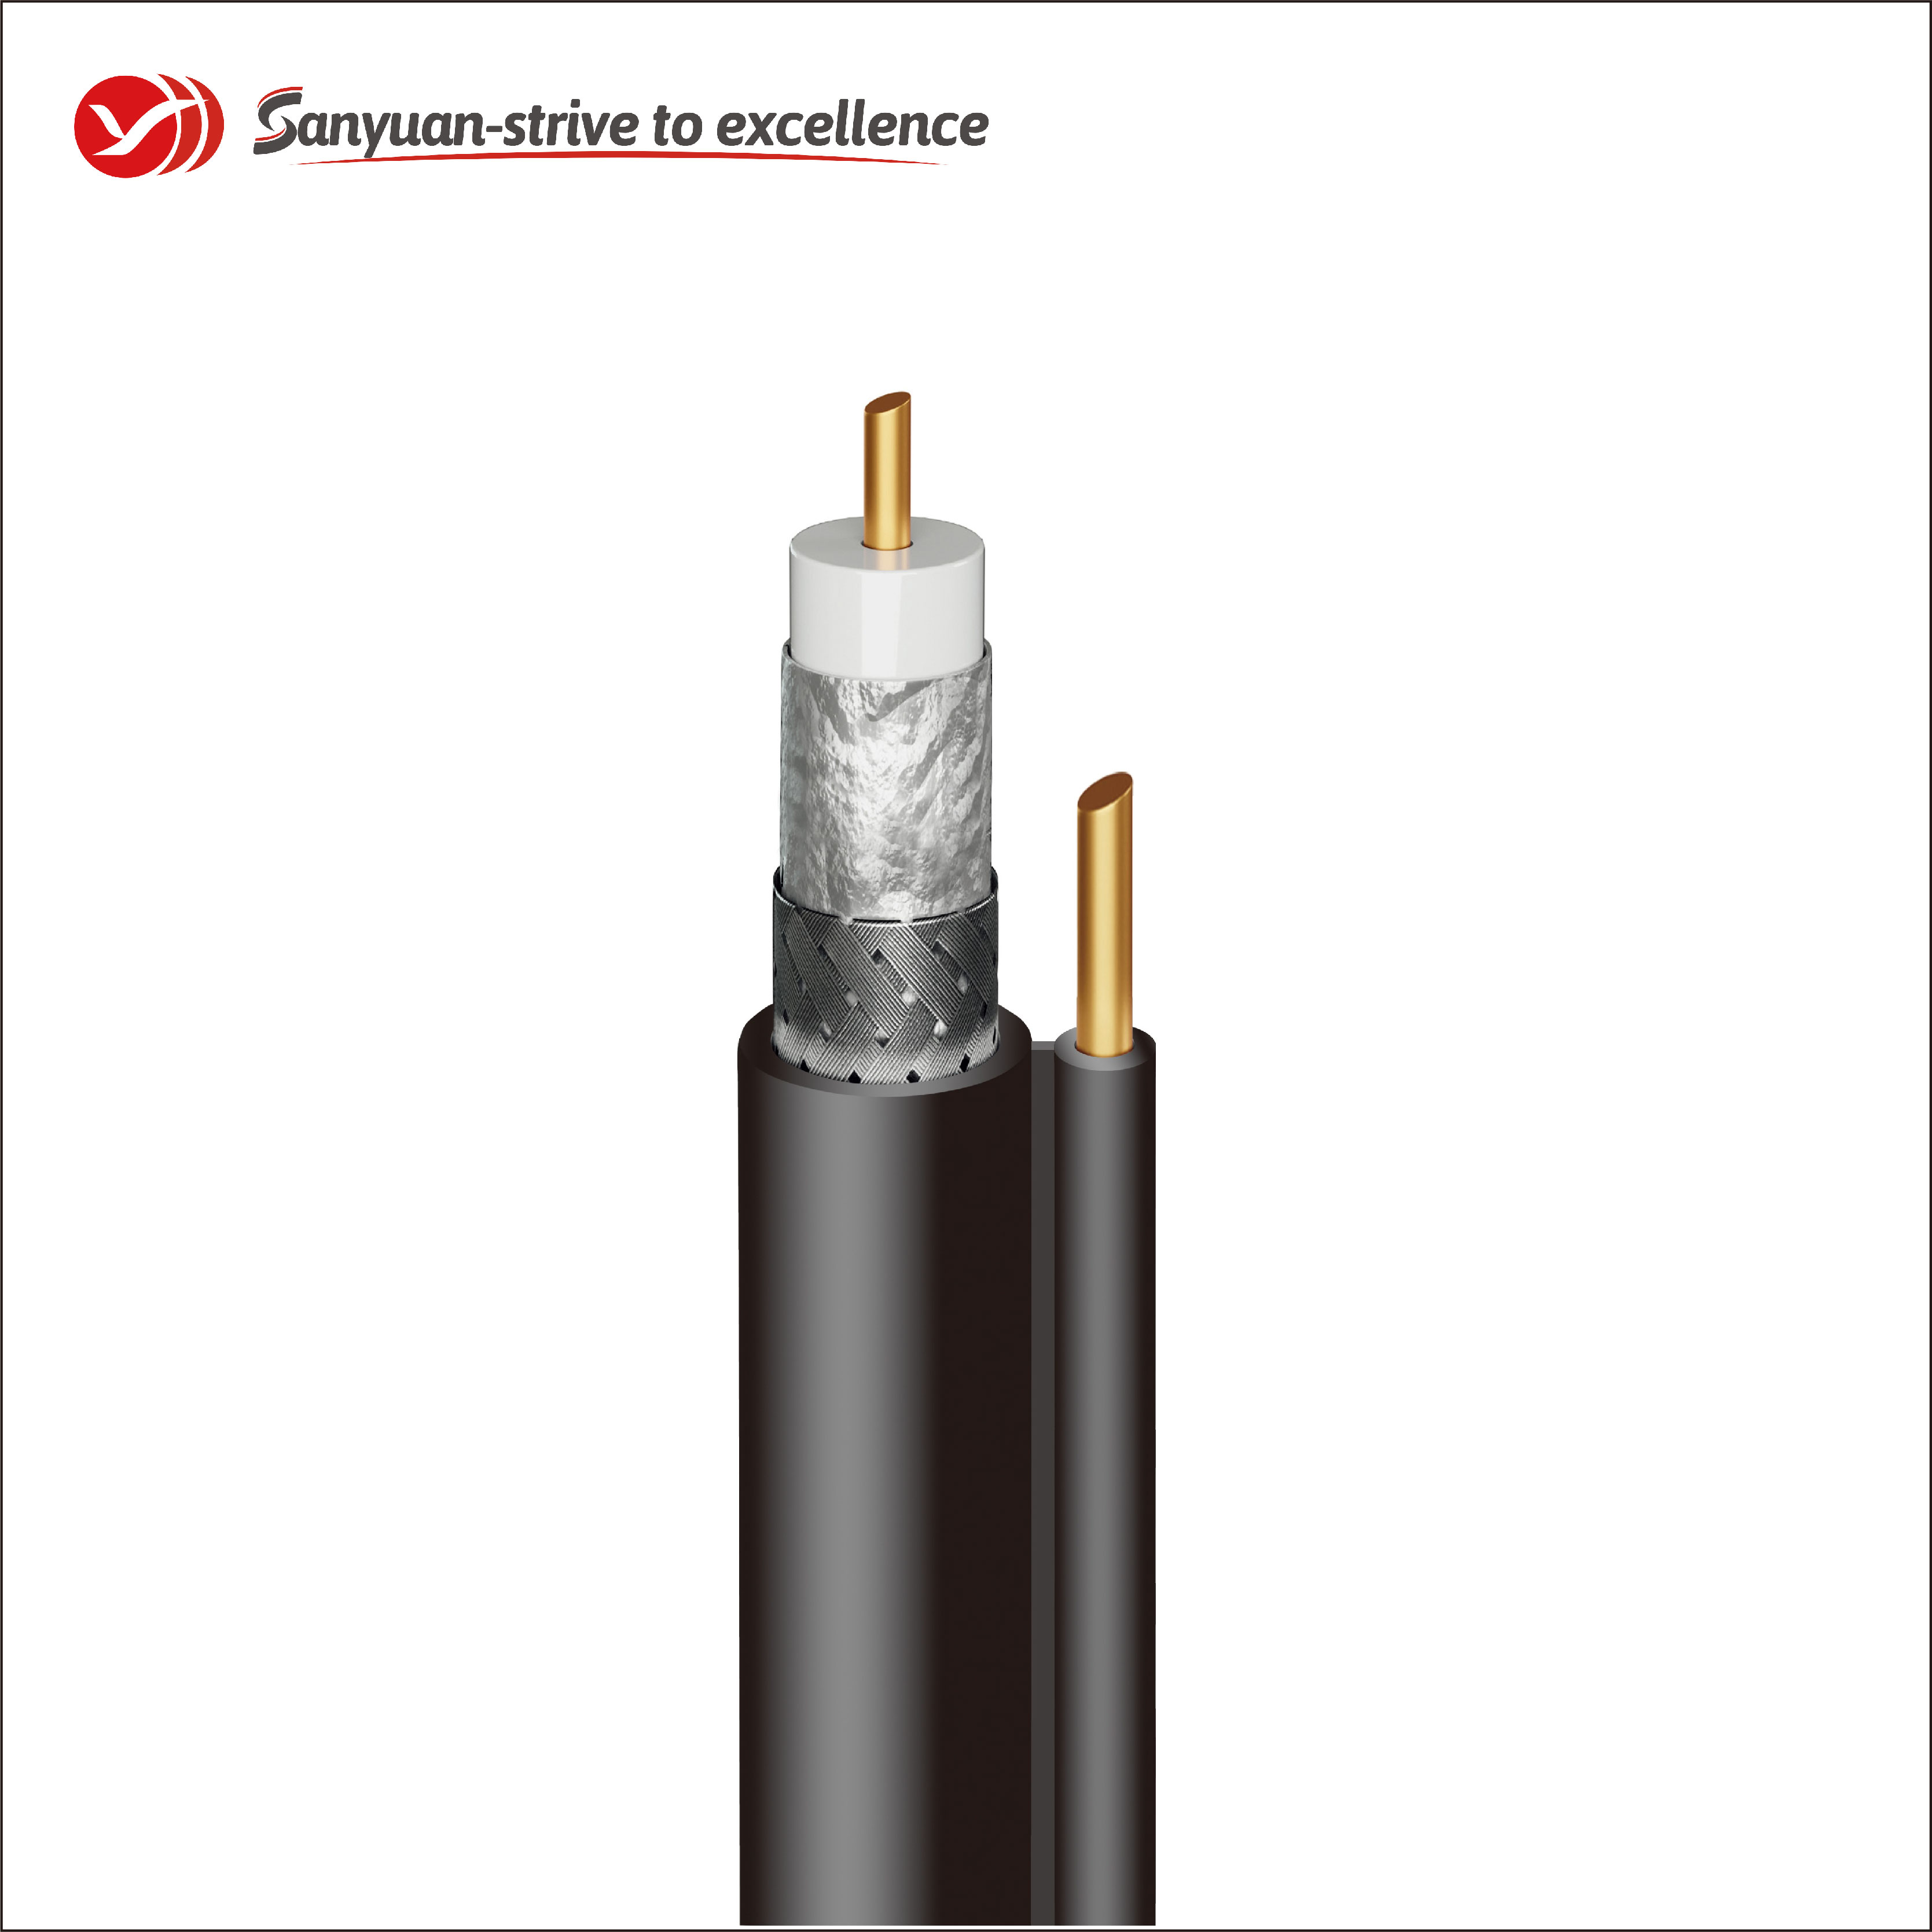 SanYuan cable 75 ohm suppliers for HDTV antennas-1